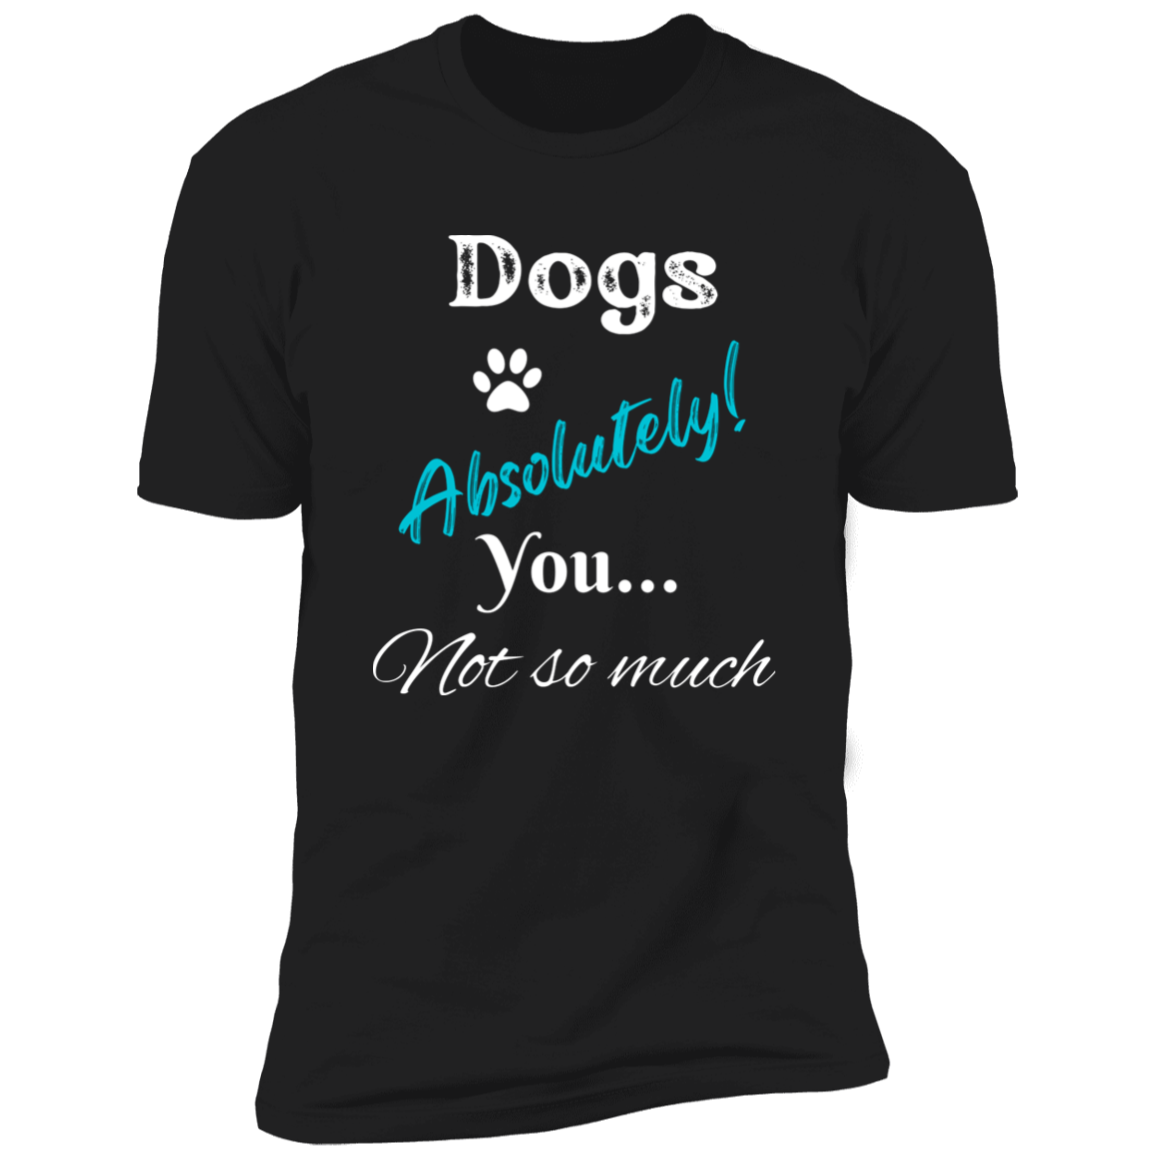 Dogs Absolutely! You Not So Much T-shirt, funny dog shirt dog shirt for humans, in black